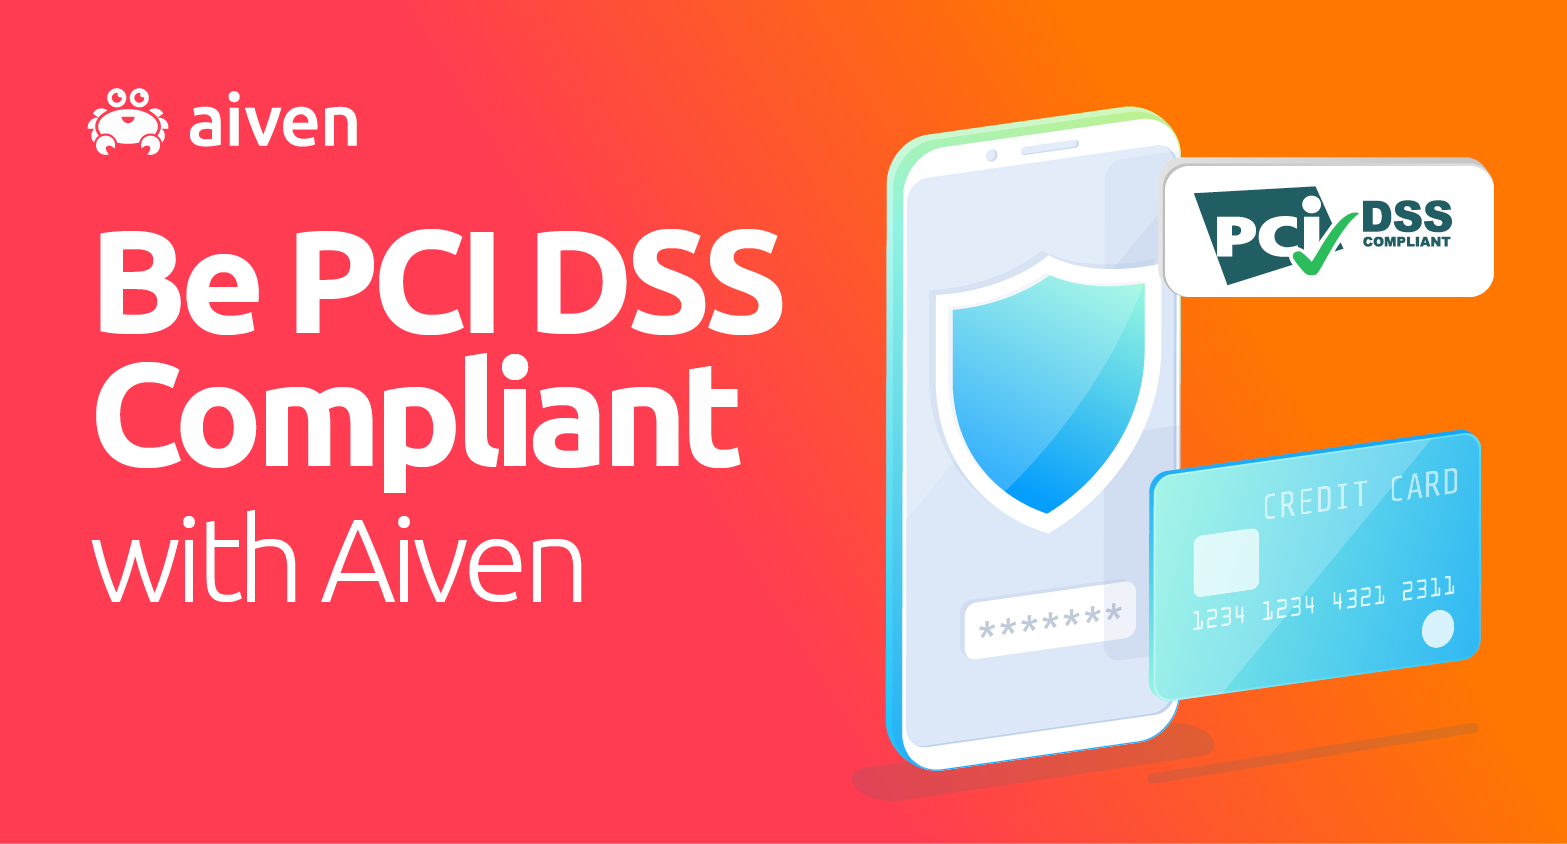 Aiven services are now PCI-DSS compliant illustration